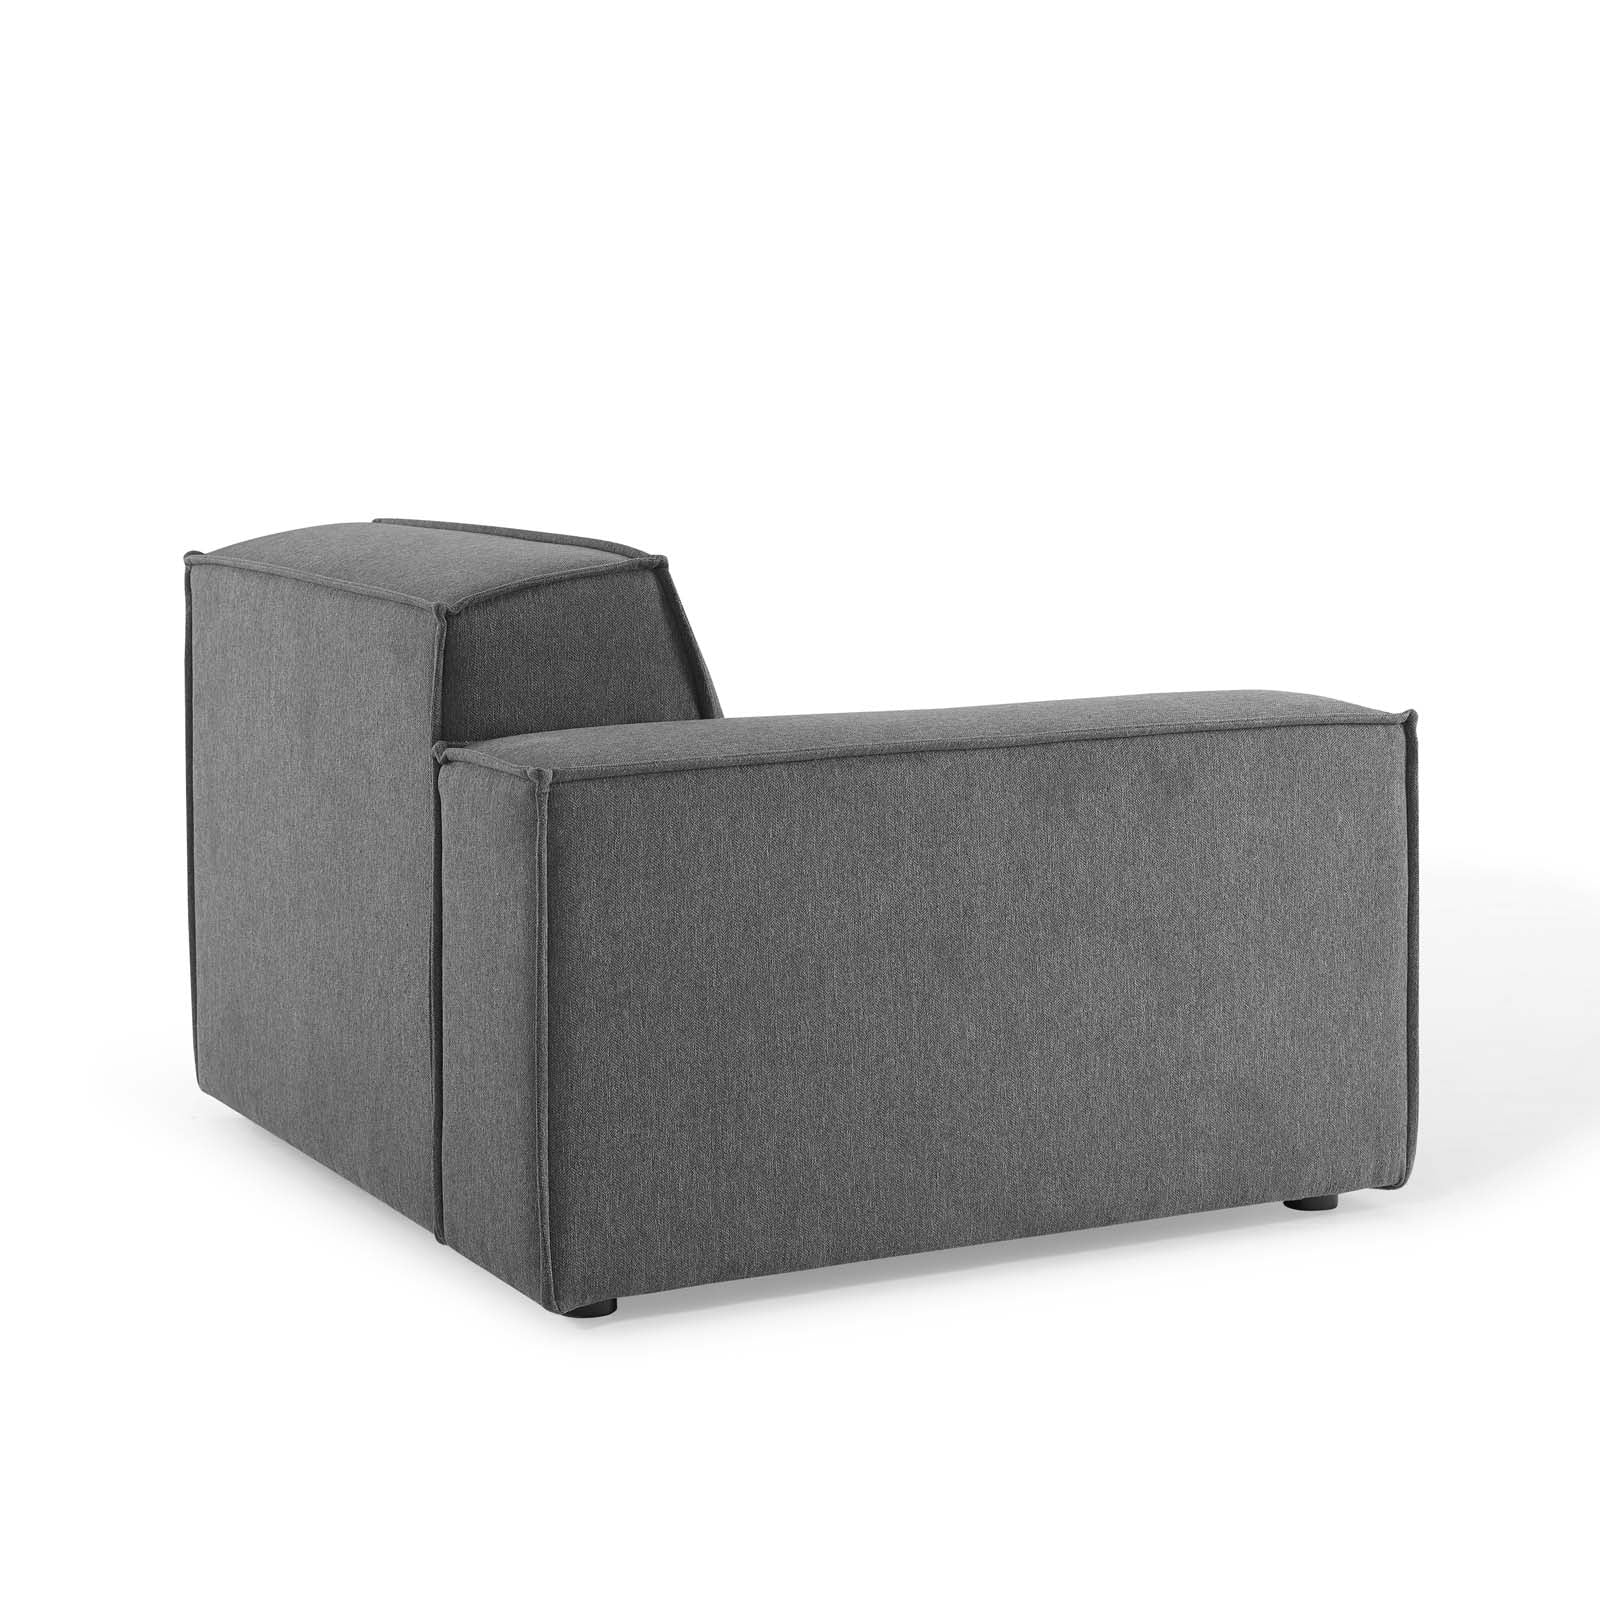 Modway Sofas & Couches - Restore 4-Piece Sofa Charcoal